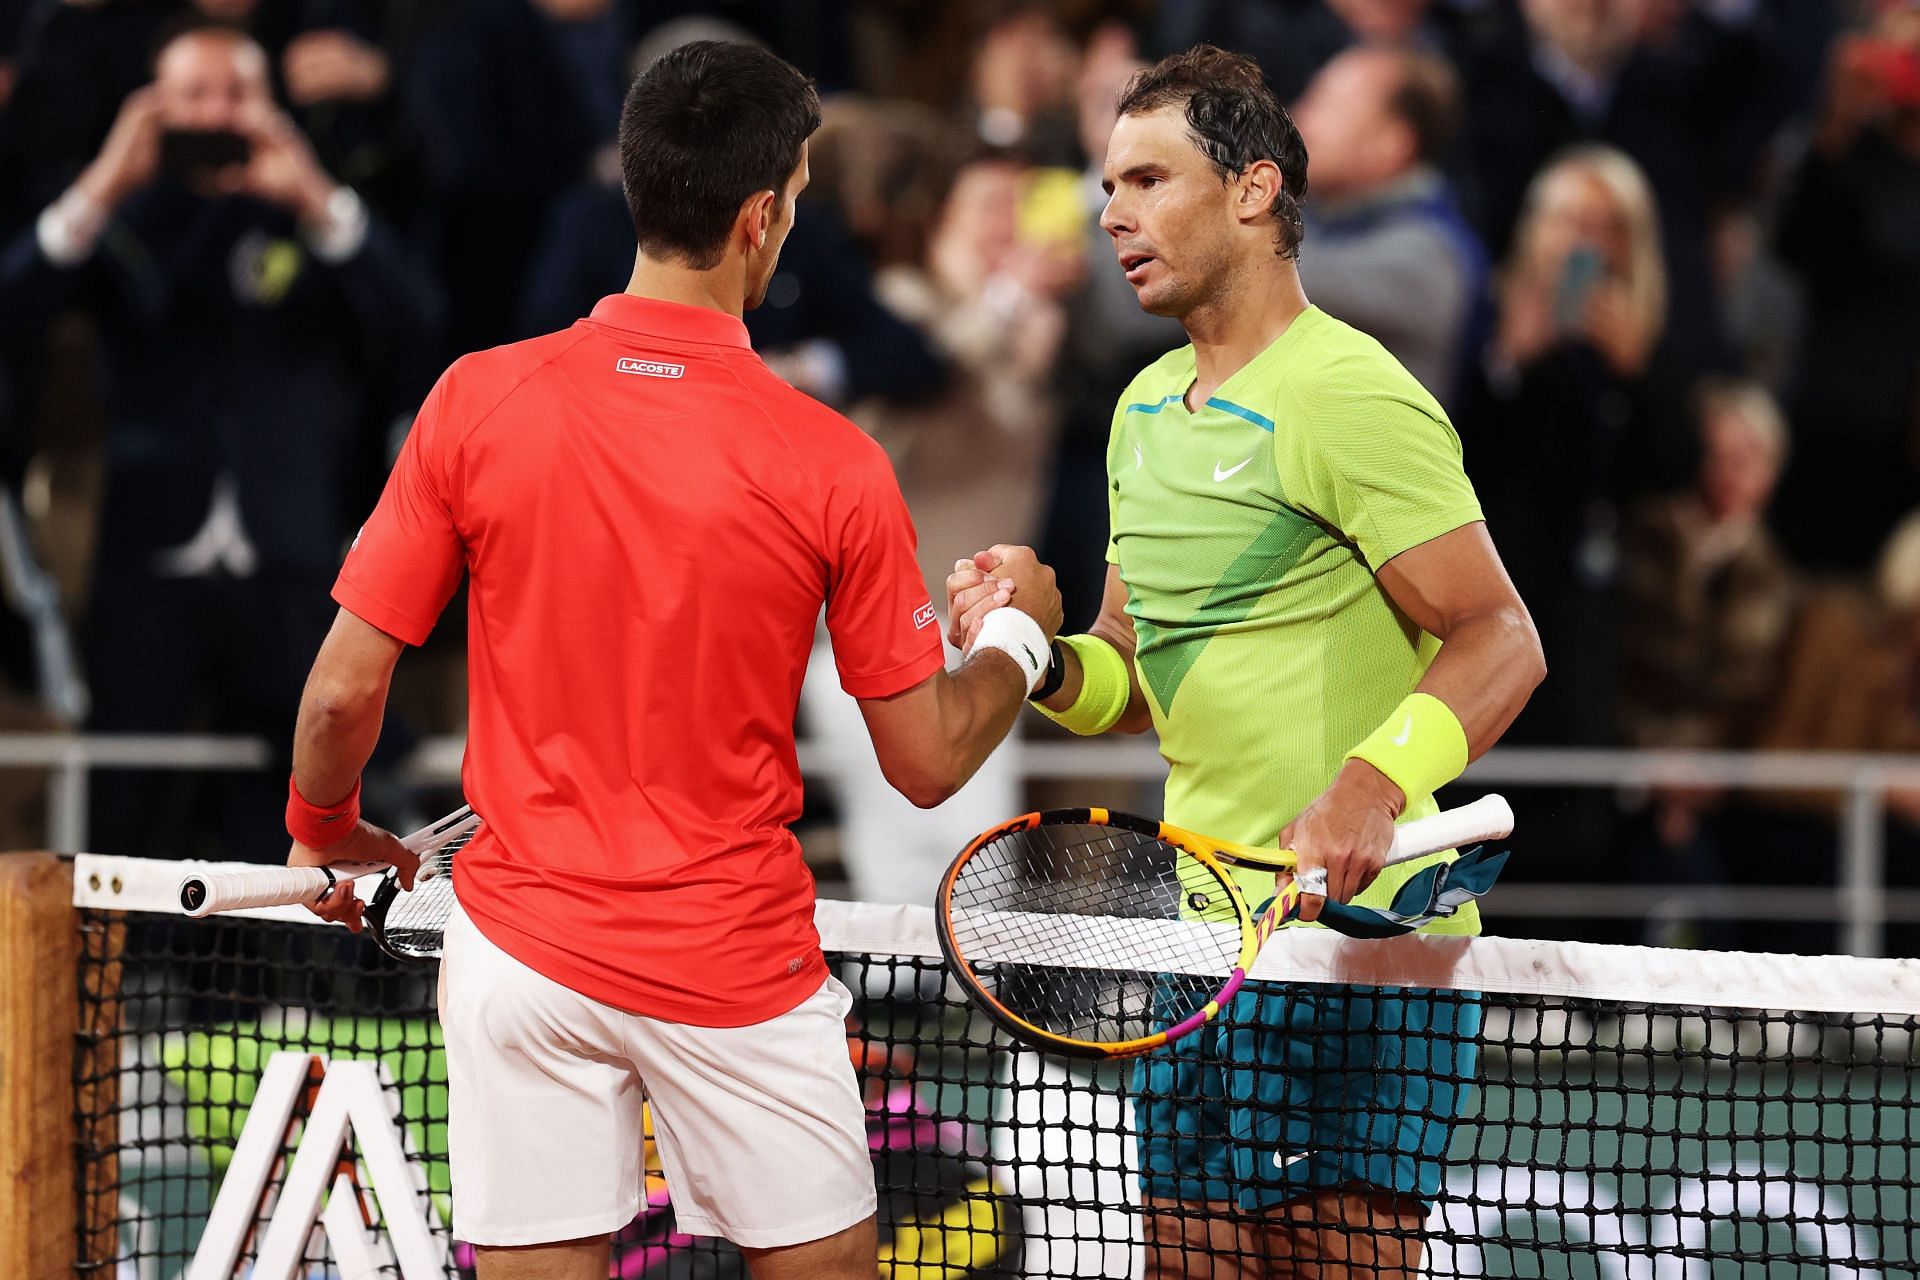 Rafael Nadal & Novak Djokovic news: What to expect from the duo this week? | May 12-May 18